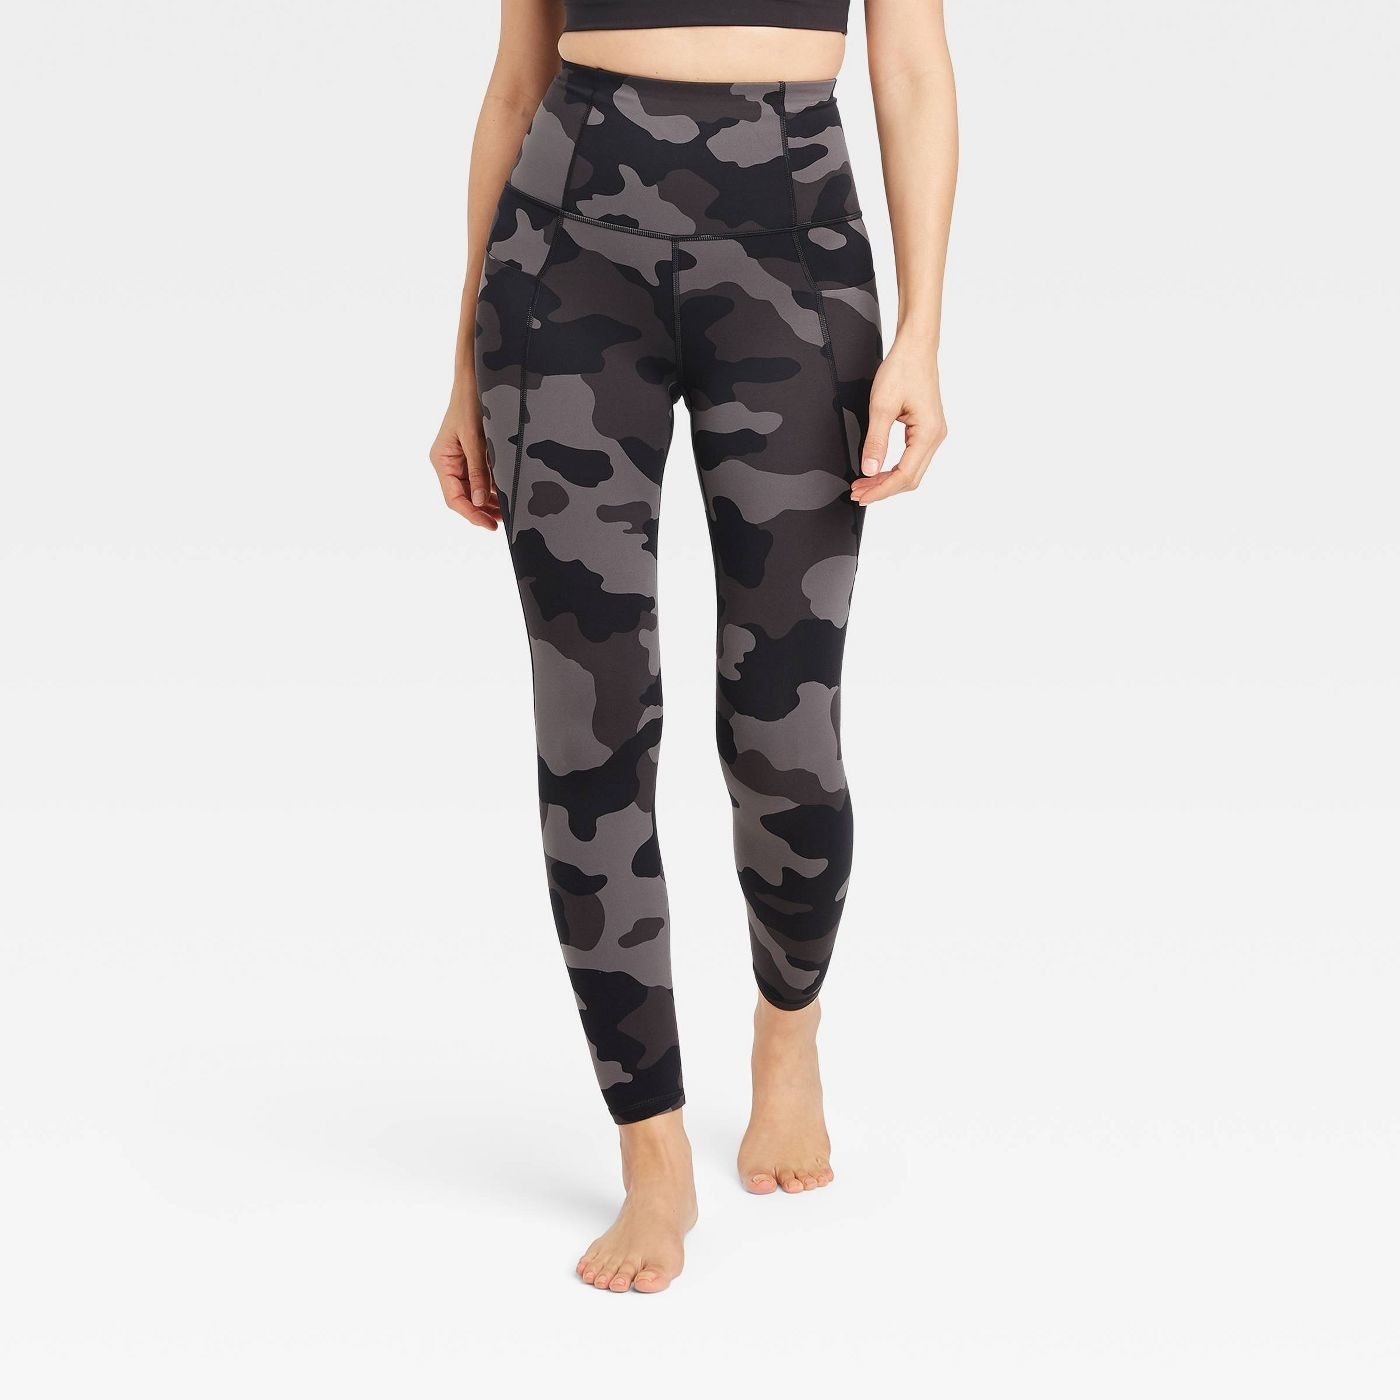 A pair of camouflage leggings